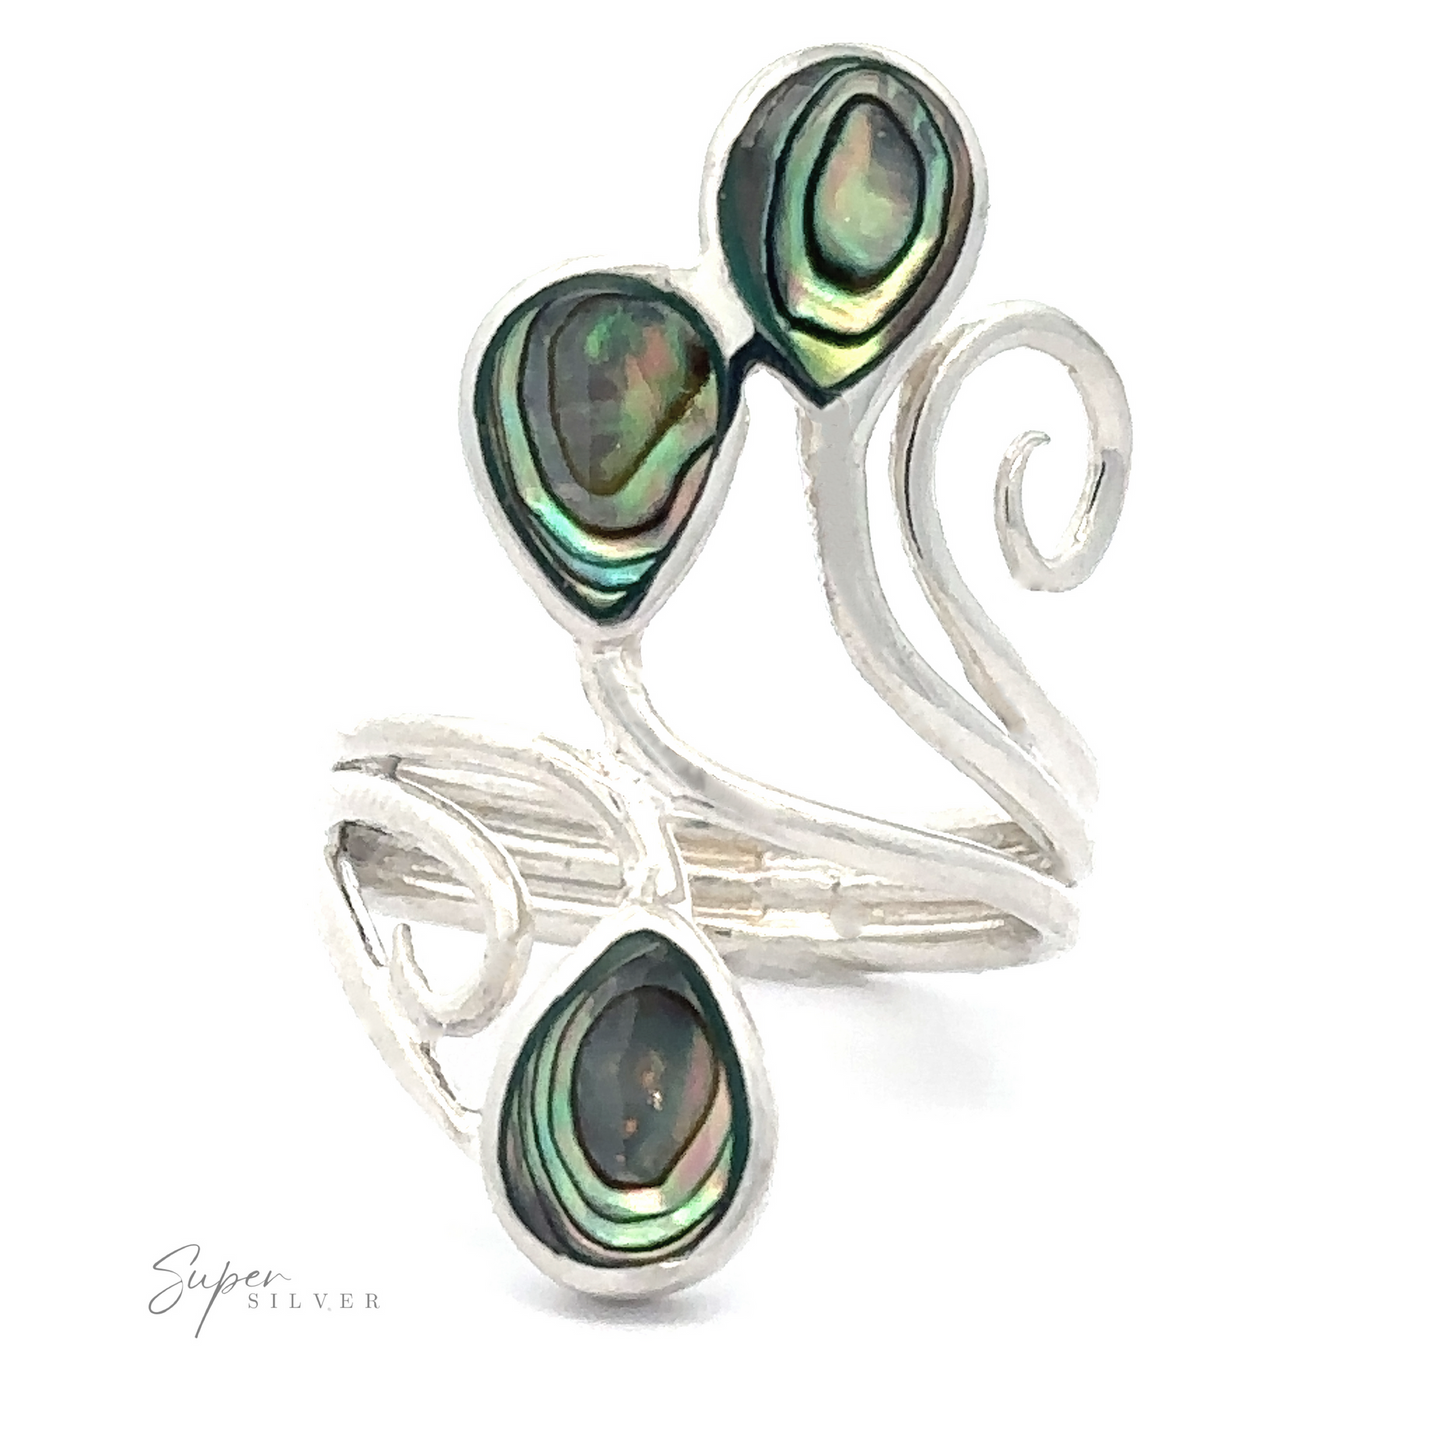 Swirl Freeform Abalone Ring with three .925 Sterling Silver abalone shell inlays.